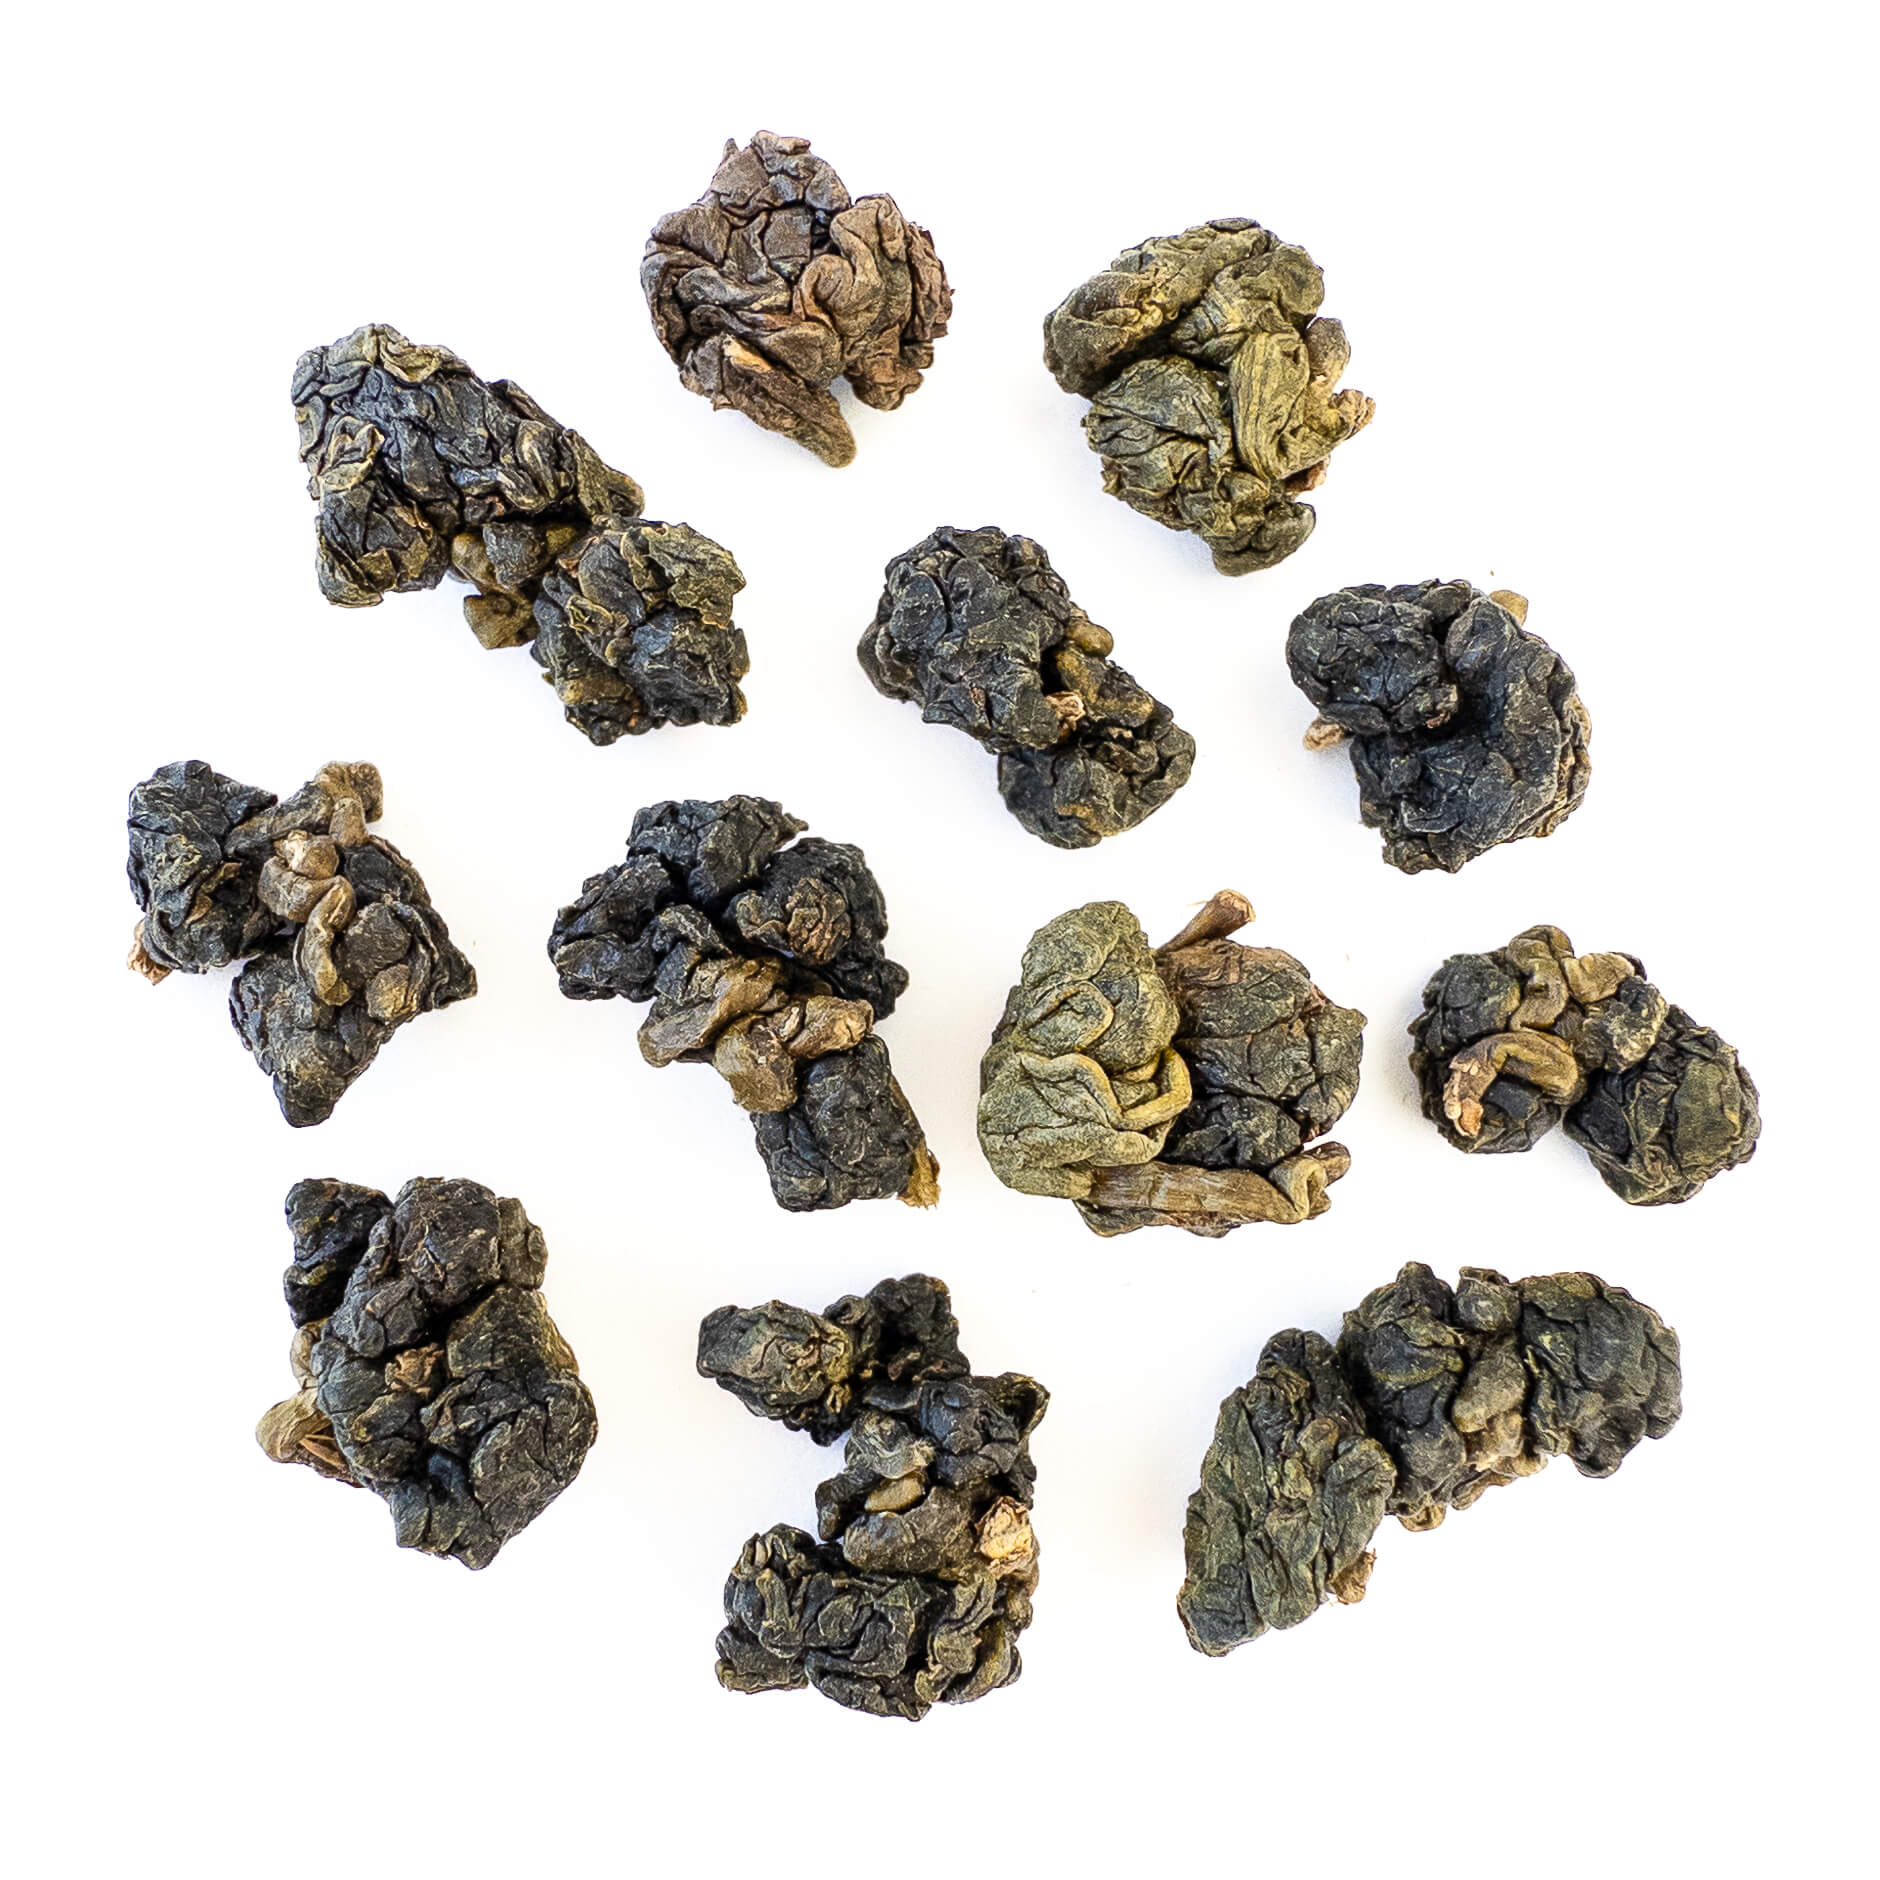 Jade Mountain Baked Oolong from Taiwan